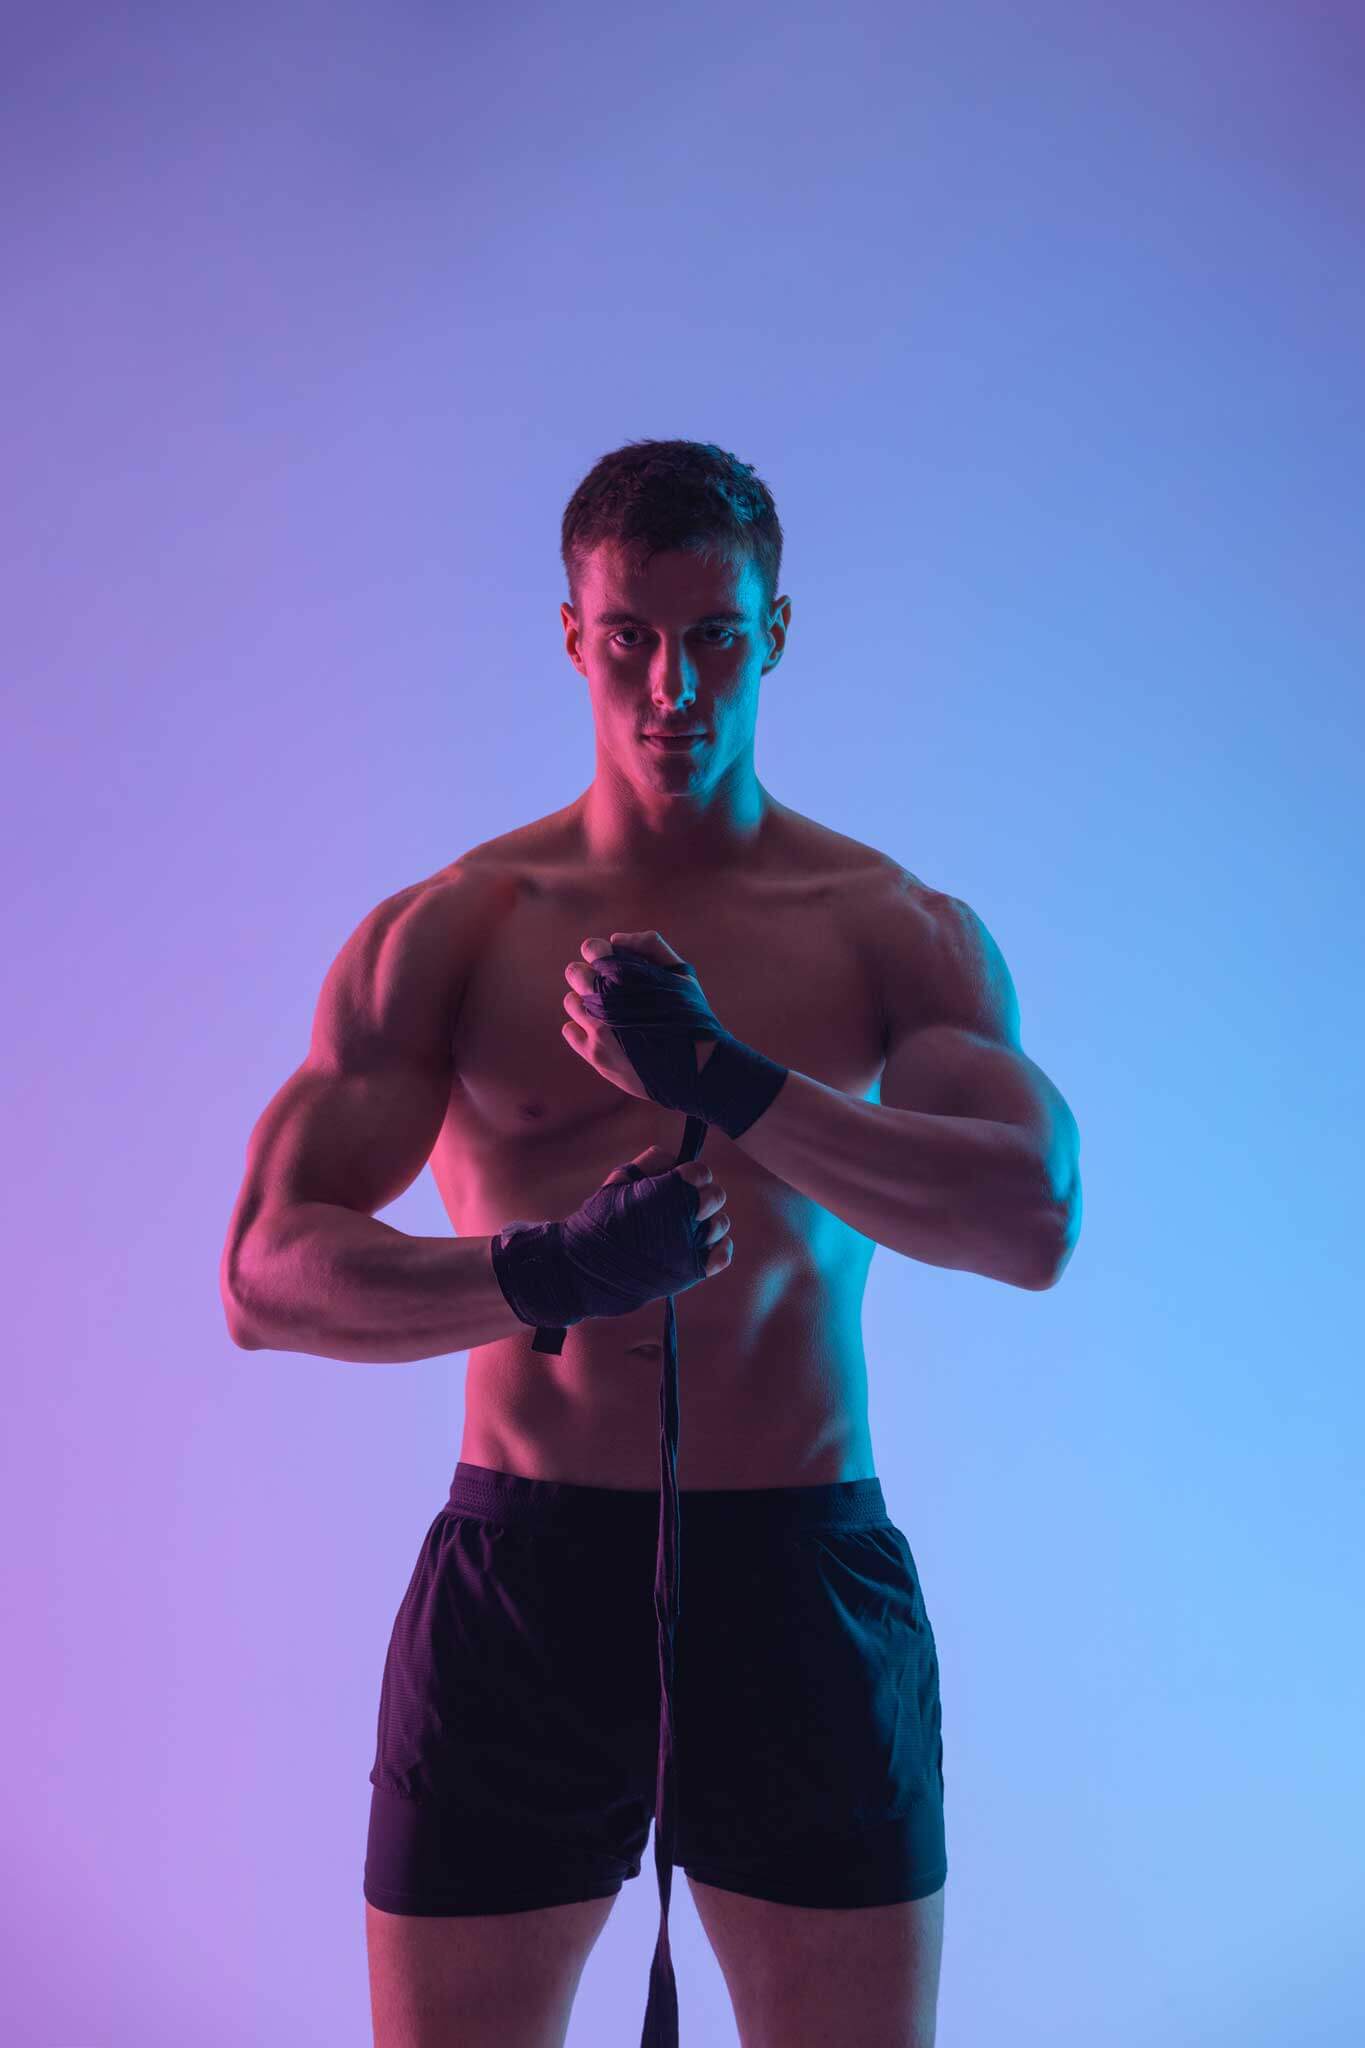 male putting on hand straps to lift weights against blue and purple neon background